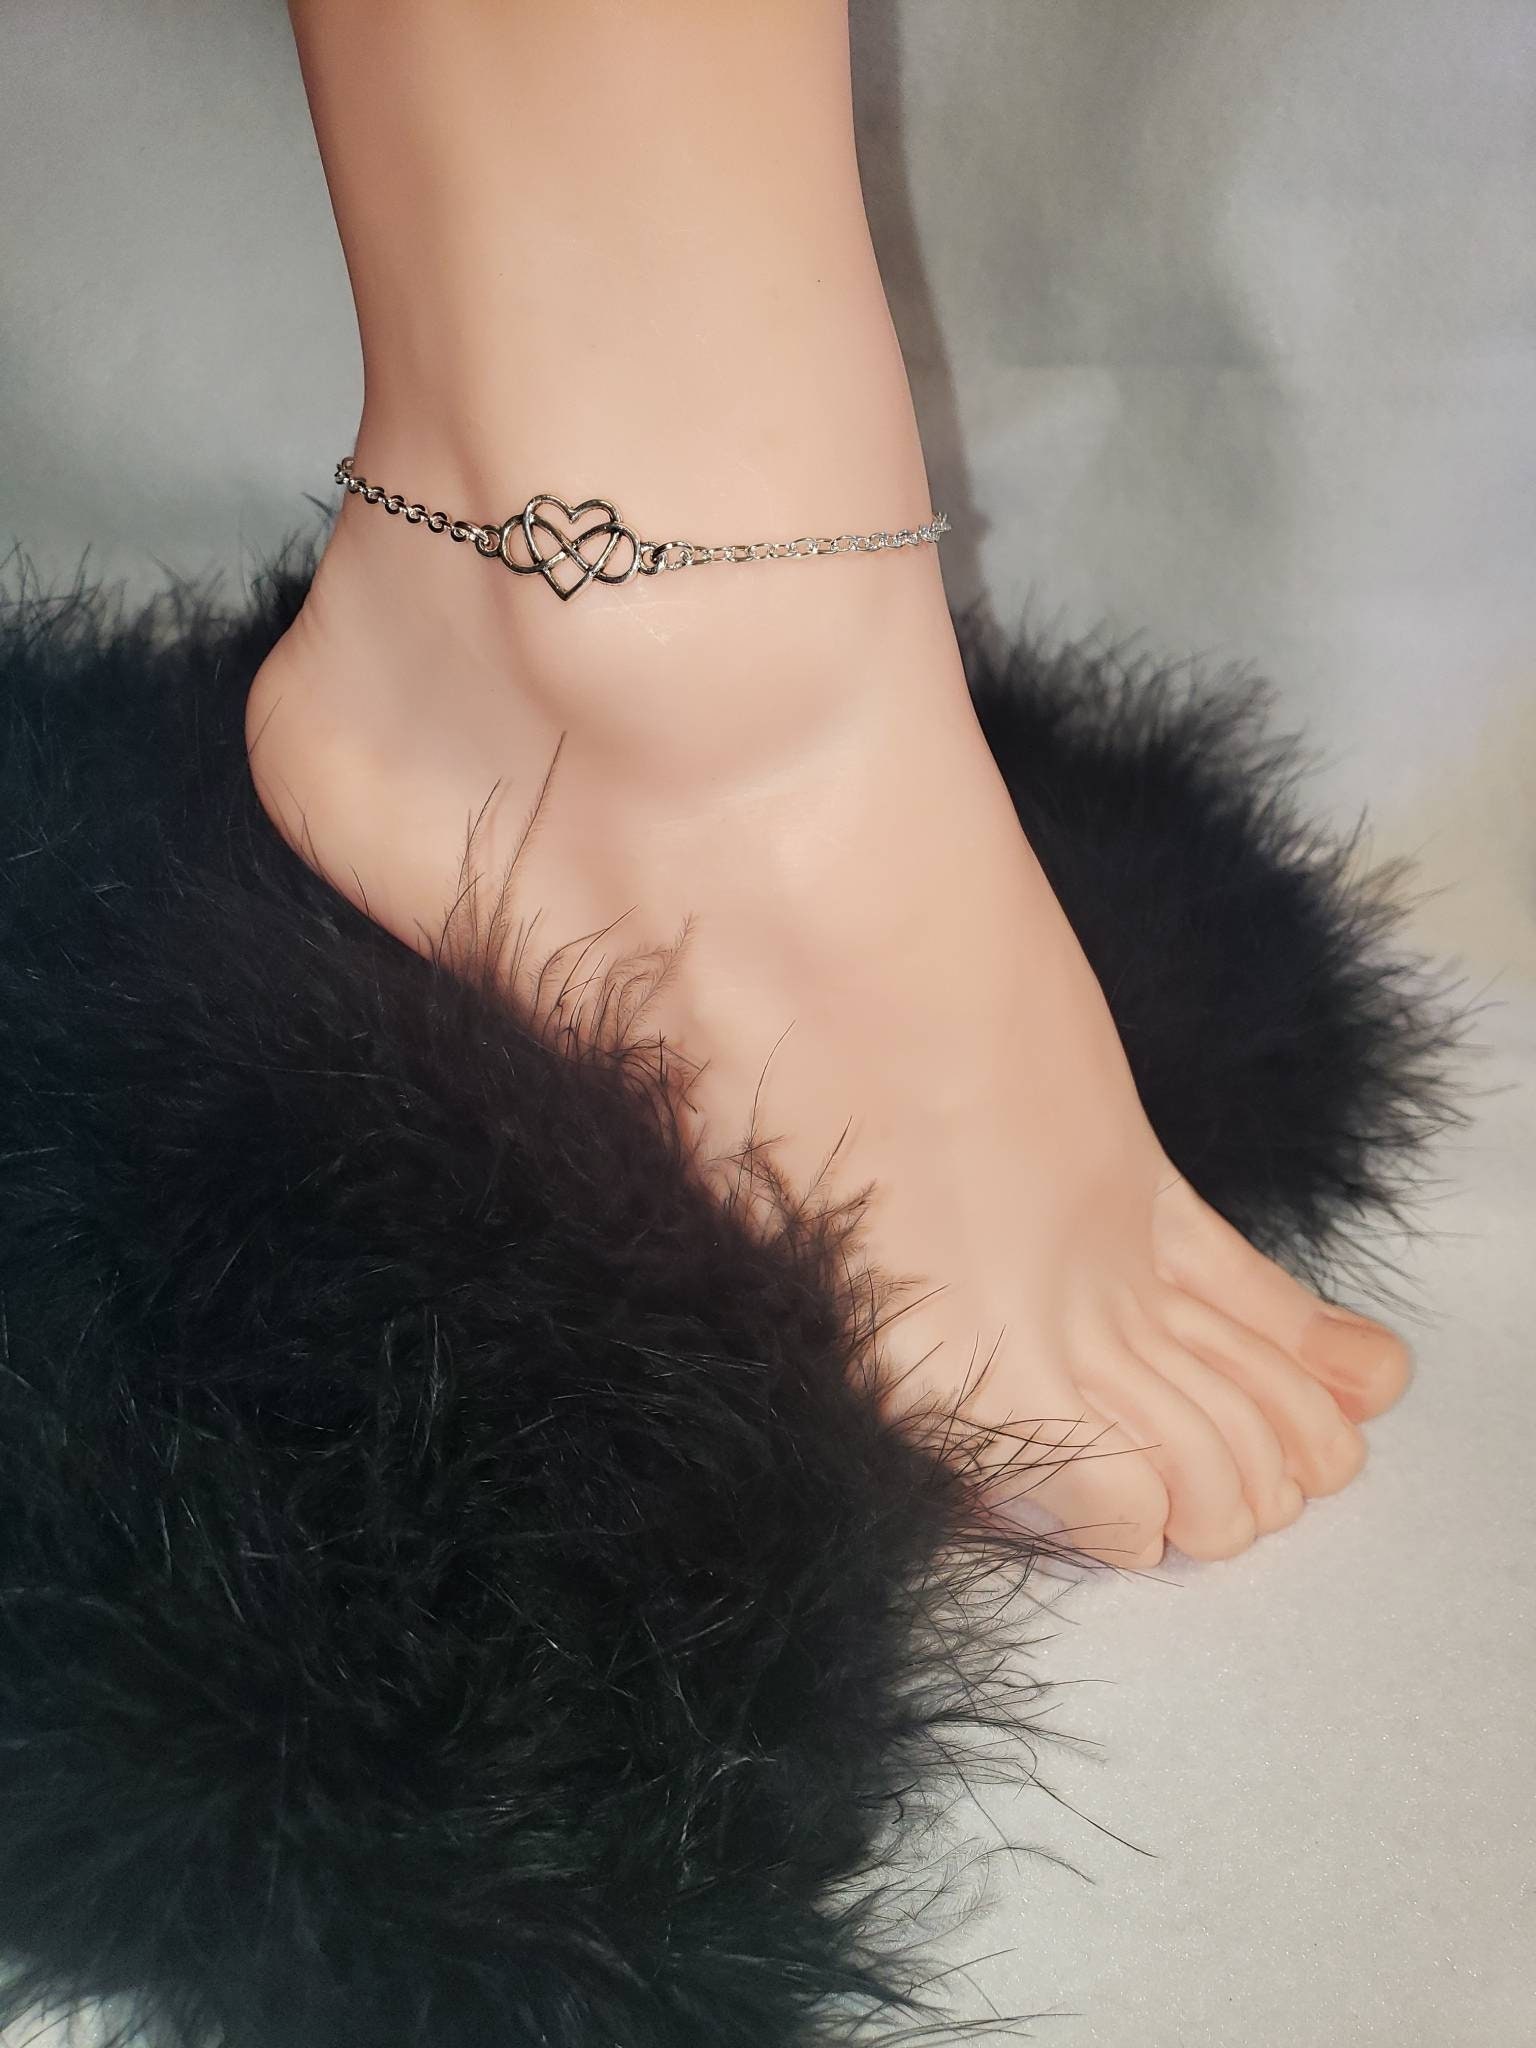 Hotwife Satin and Steel Anklet With Vixen Fox Charm MFM, Threesome,  Swinger, Hot Wife, QOS, Queen of Spades, BBC, Jewelry, Bracelet - Etsy